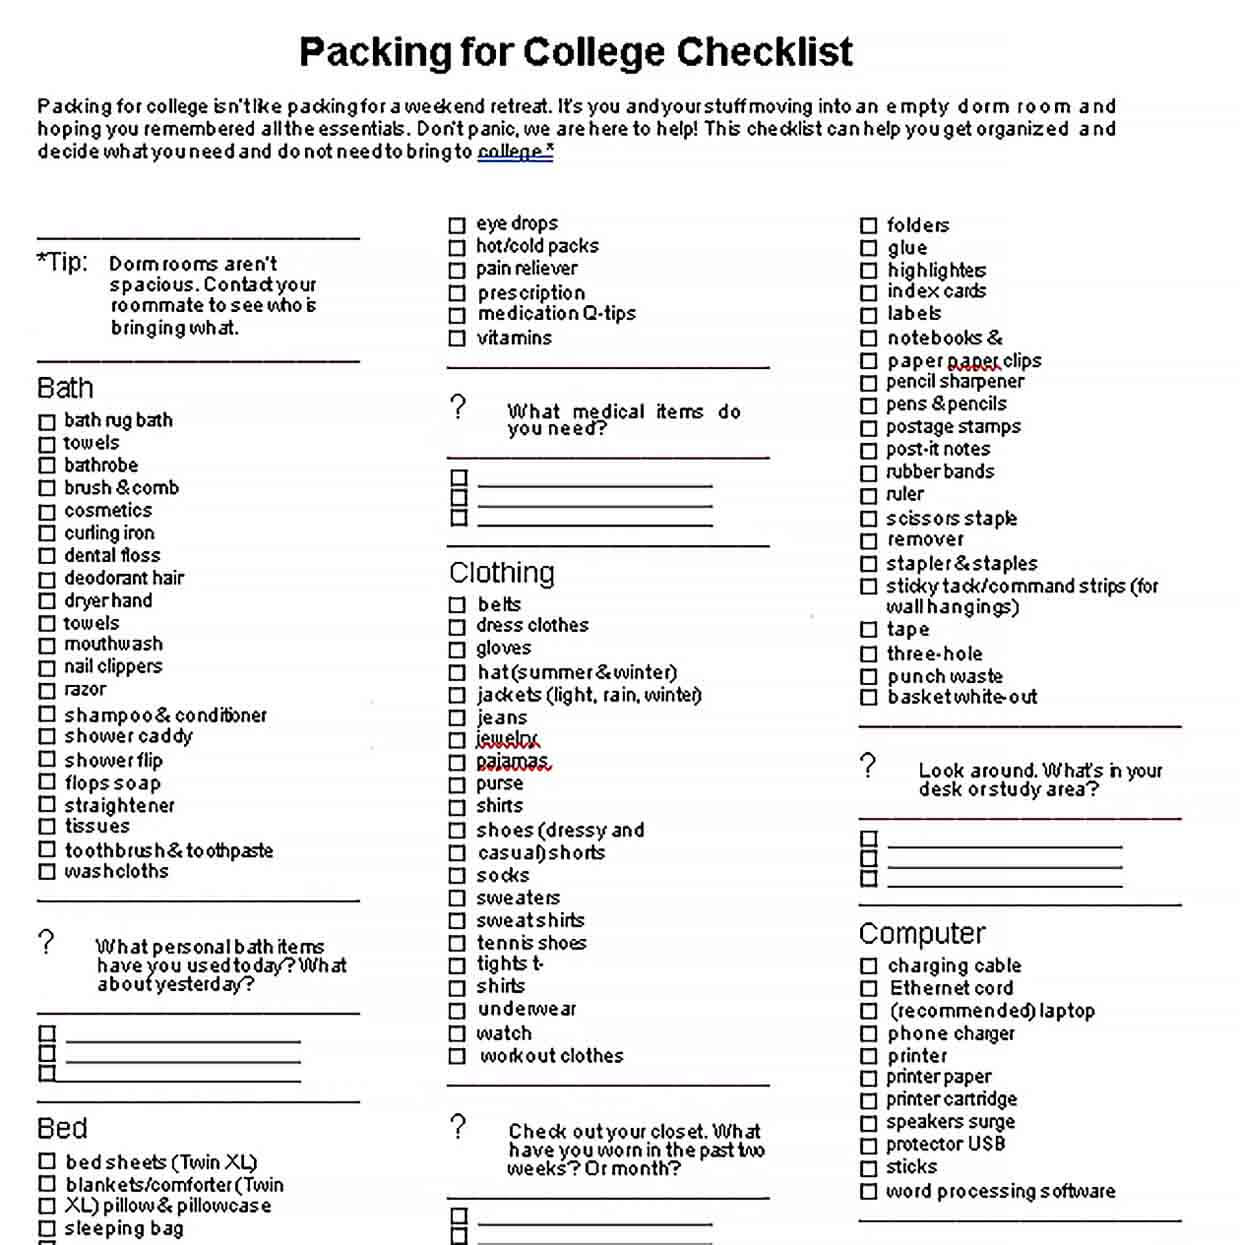 Sample Packing For College Checklist 2